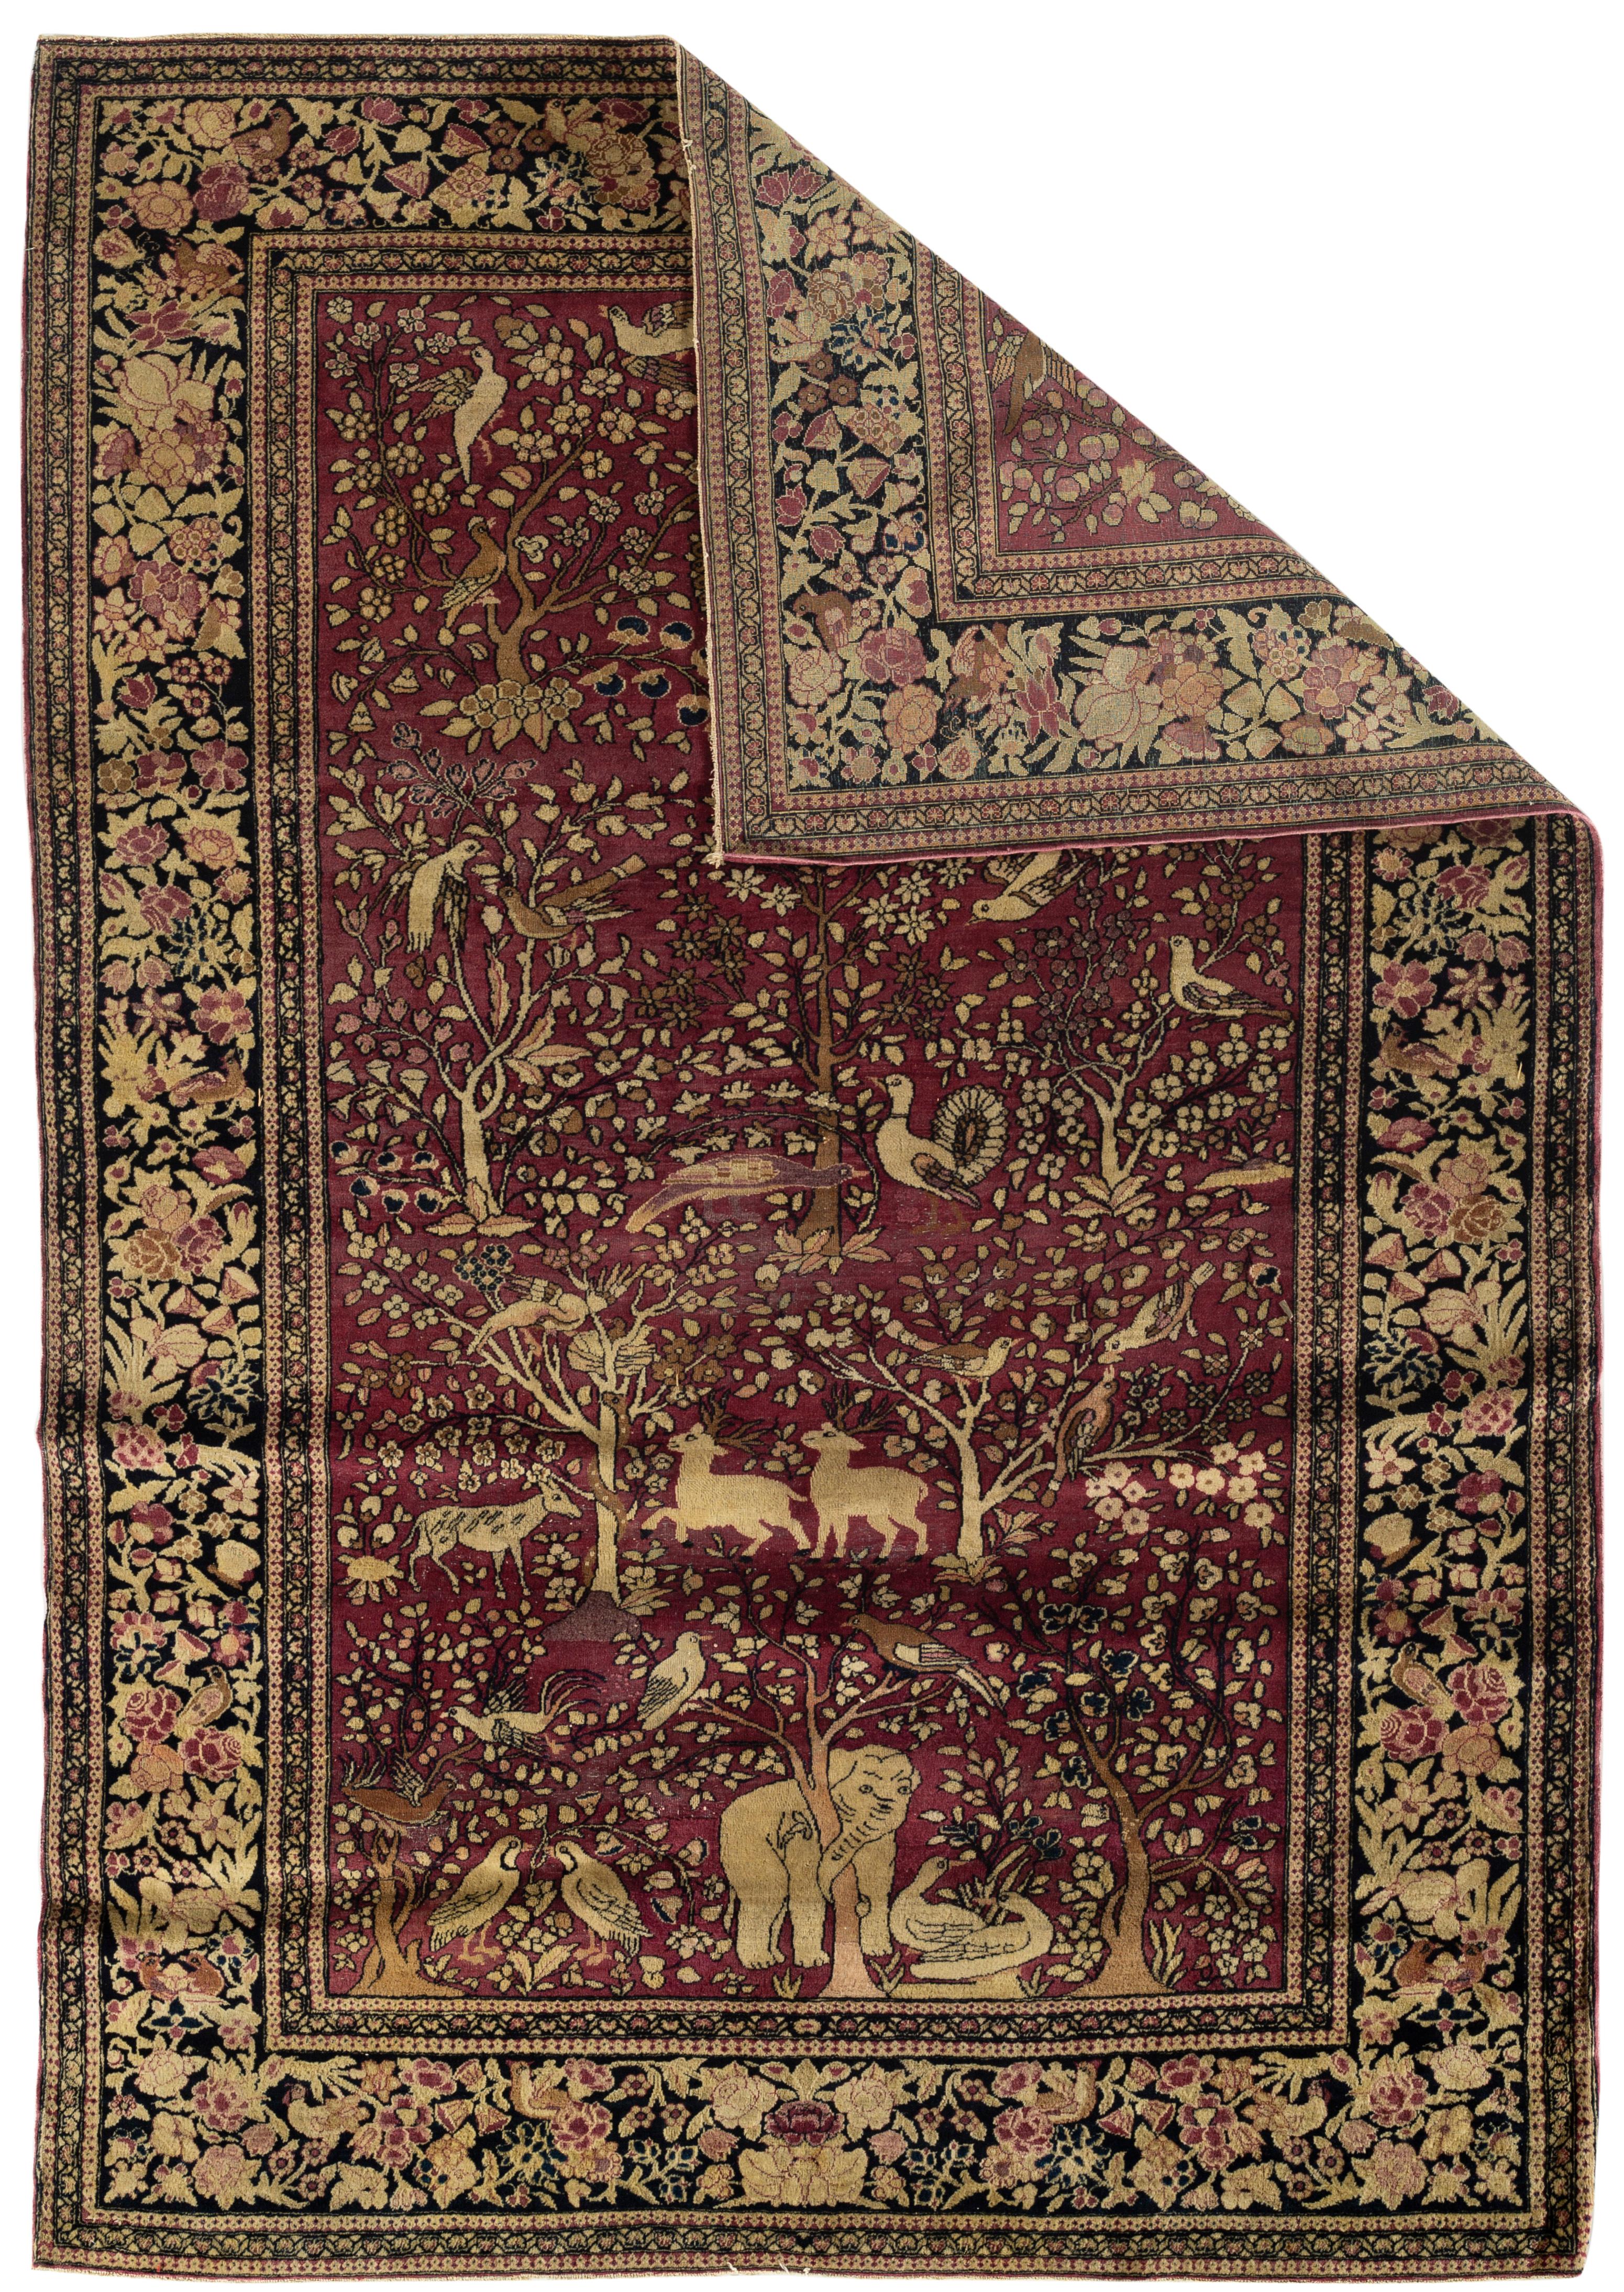 Antique Isphahan Pictorial Rug, circa 1880 In Excellent Condition For Sale In Secaucus, NJ